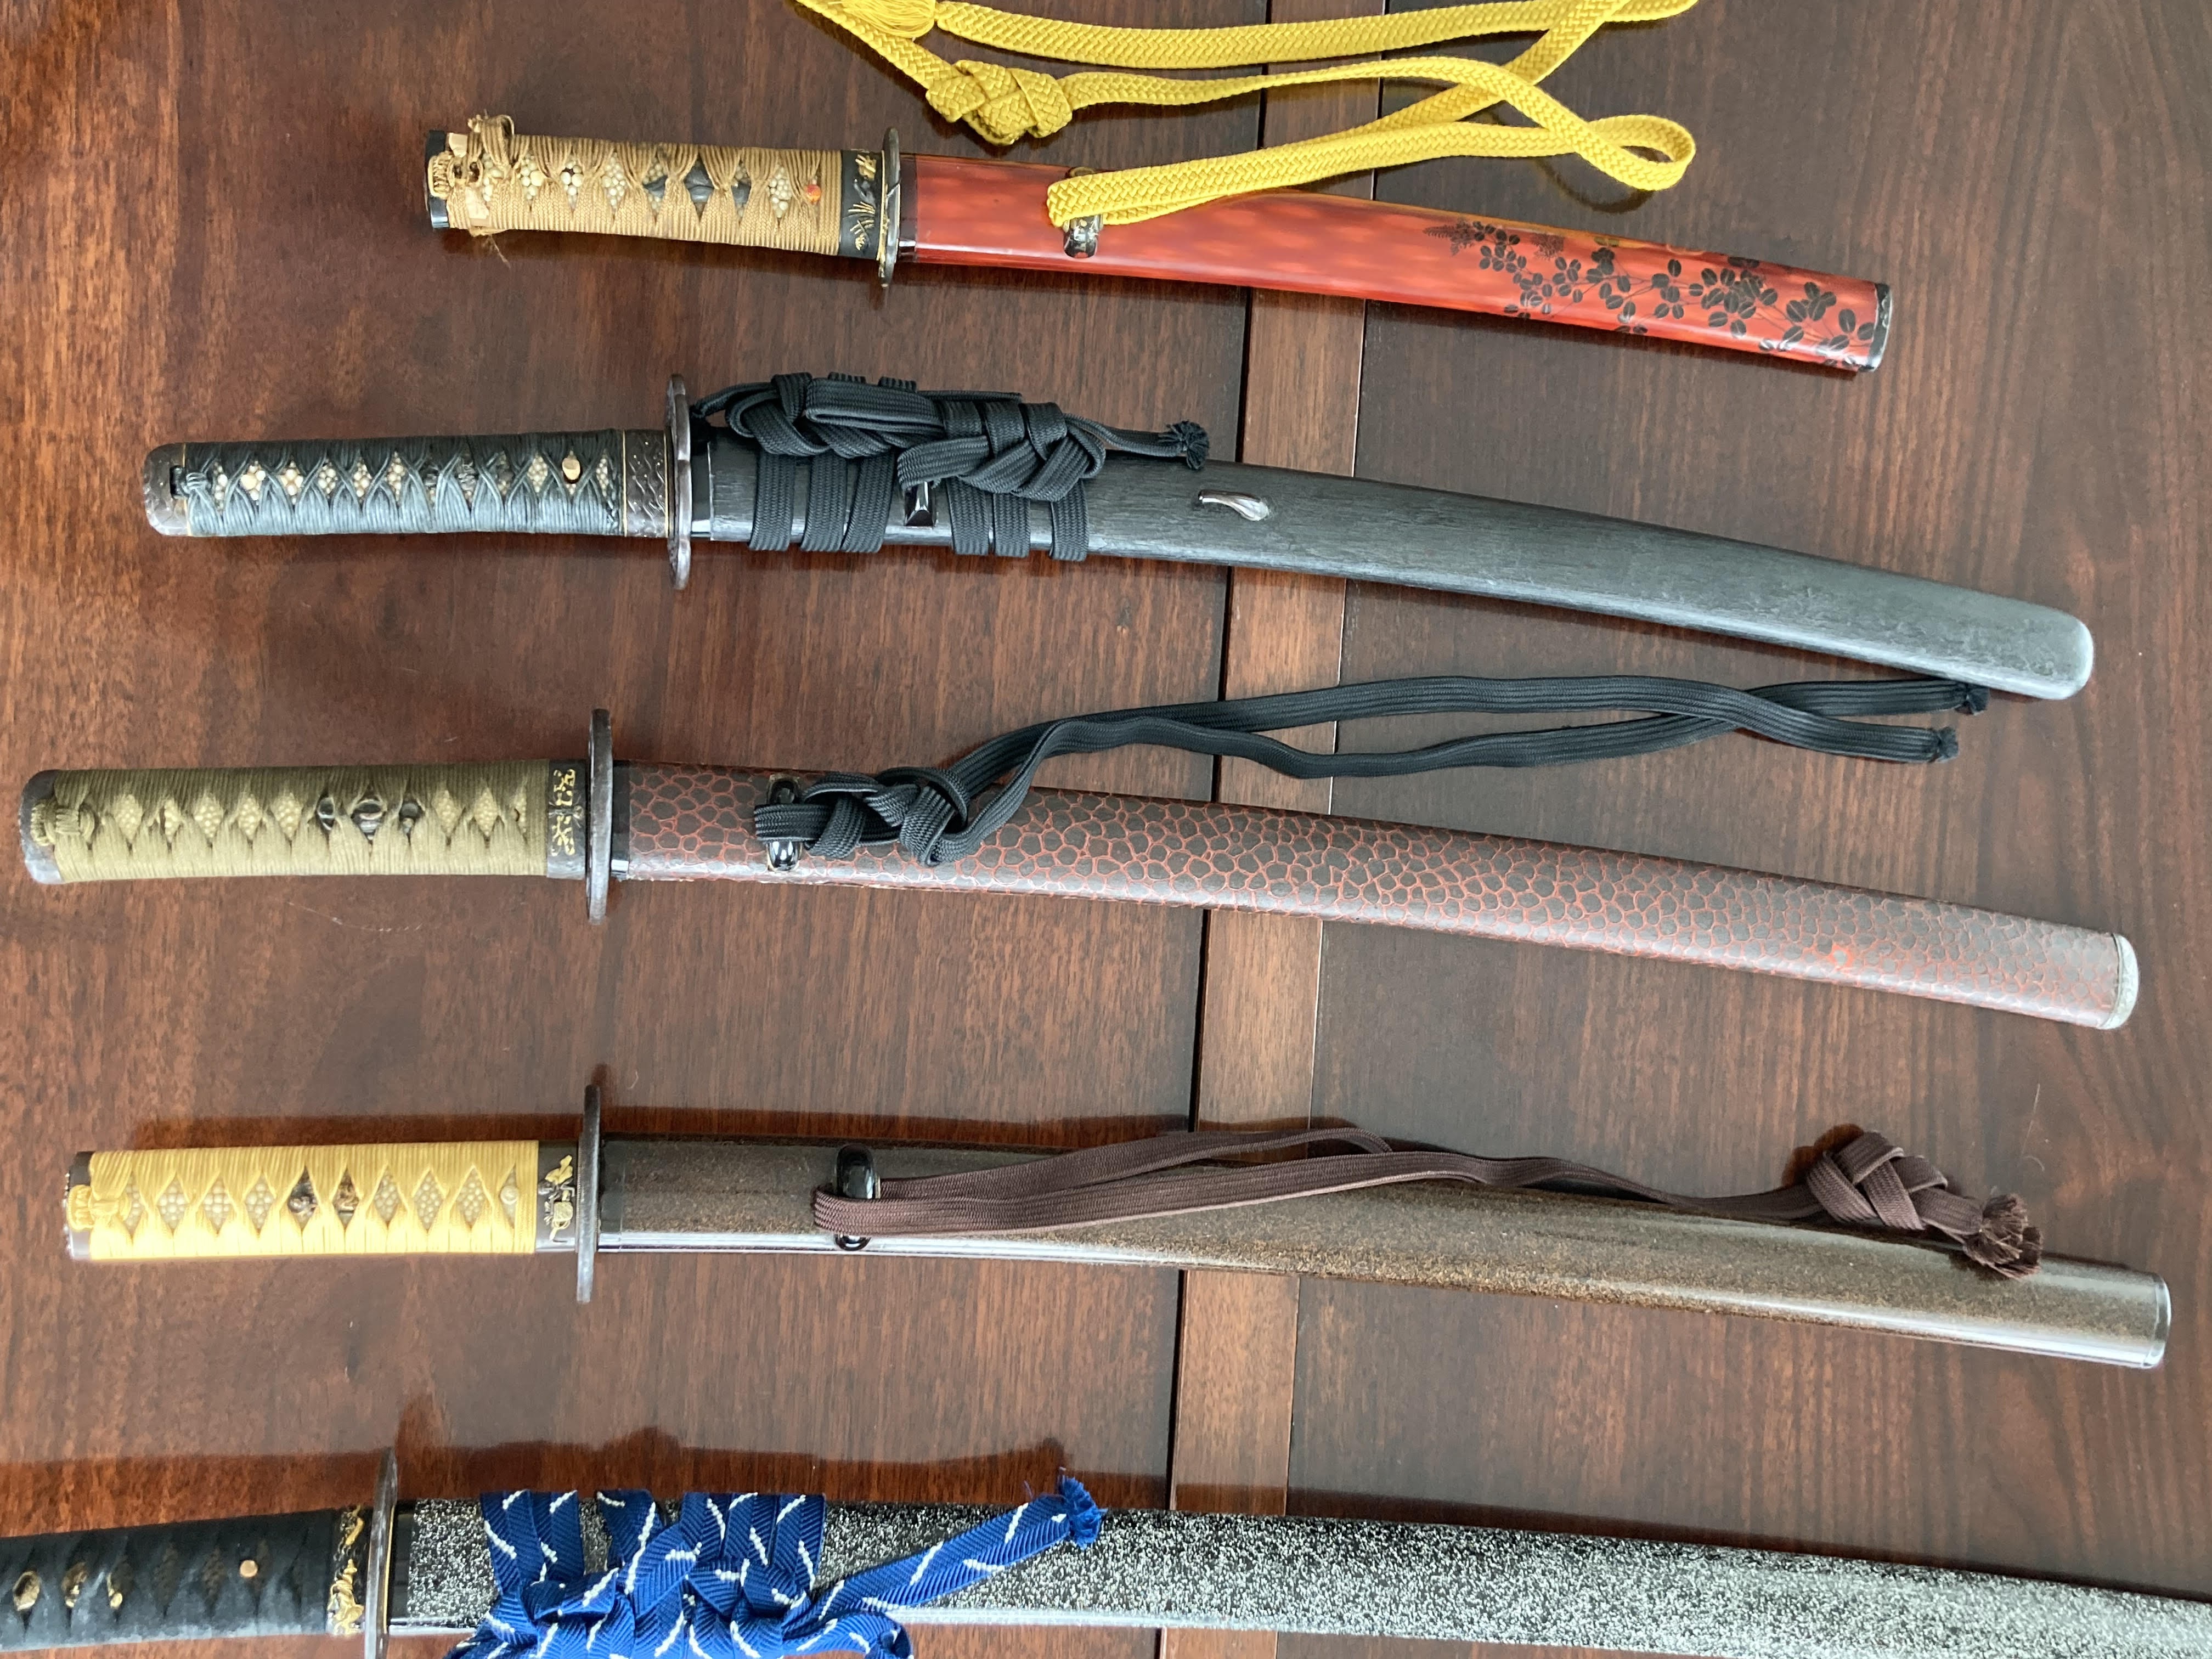 Spoils of Time offers Japanese swords and fittings from an ever changing selection.